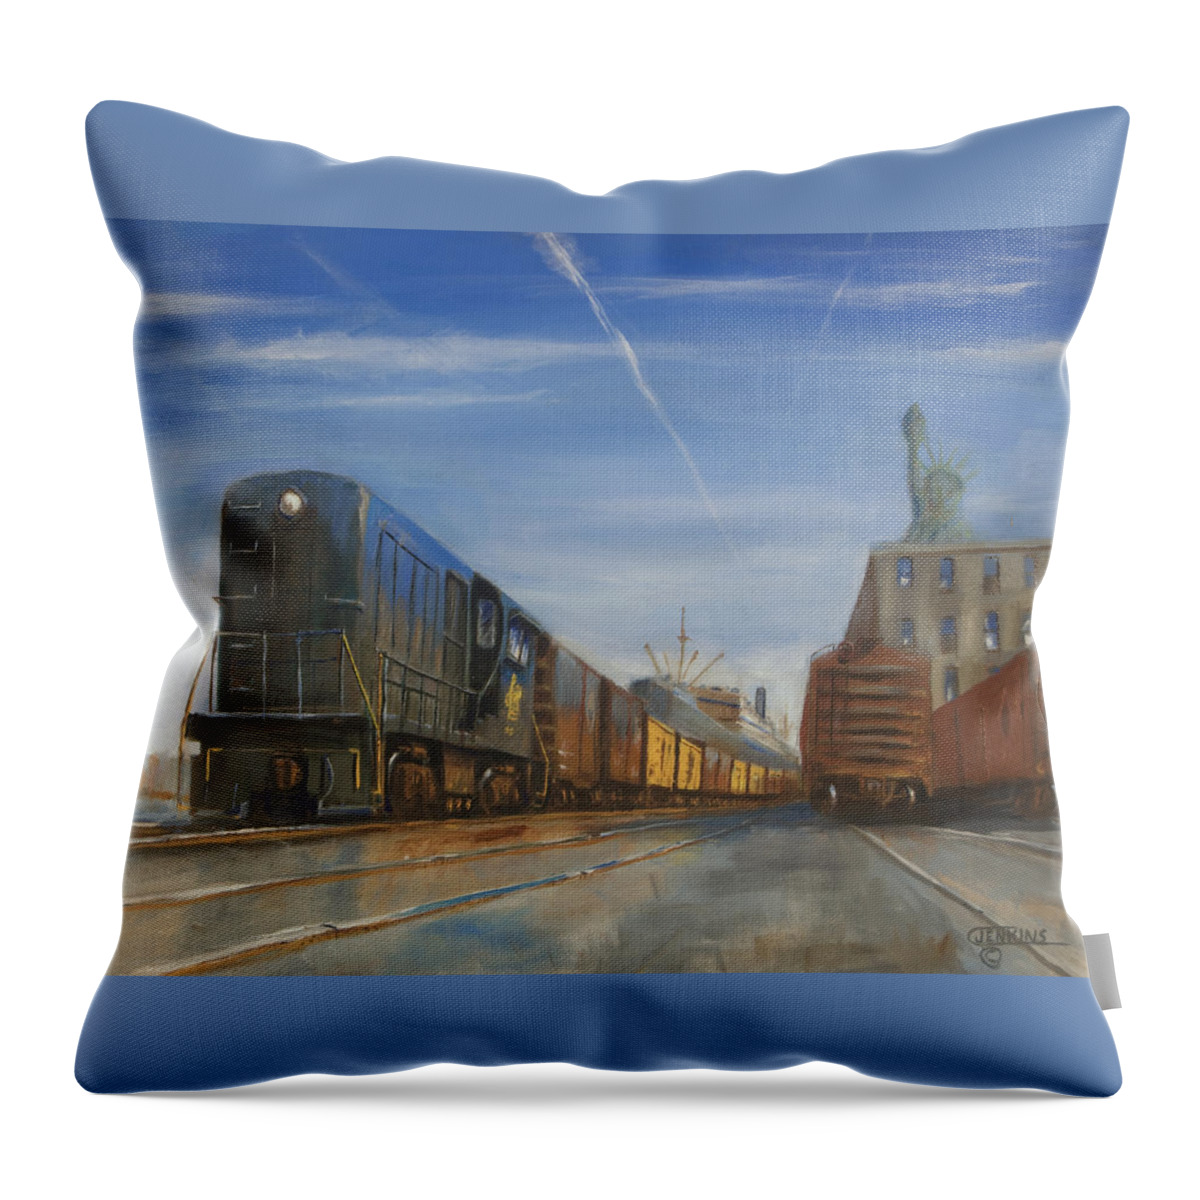 Trains Throw Pillow featuring the painting Jersey Central Lines by Christopher Jenkins